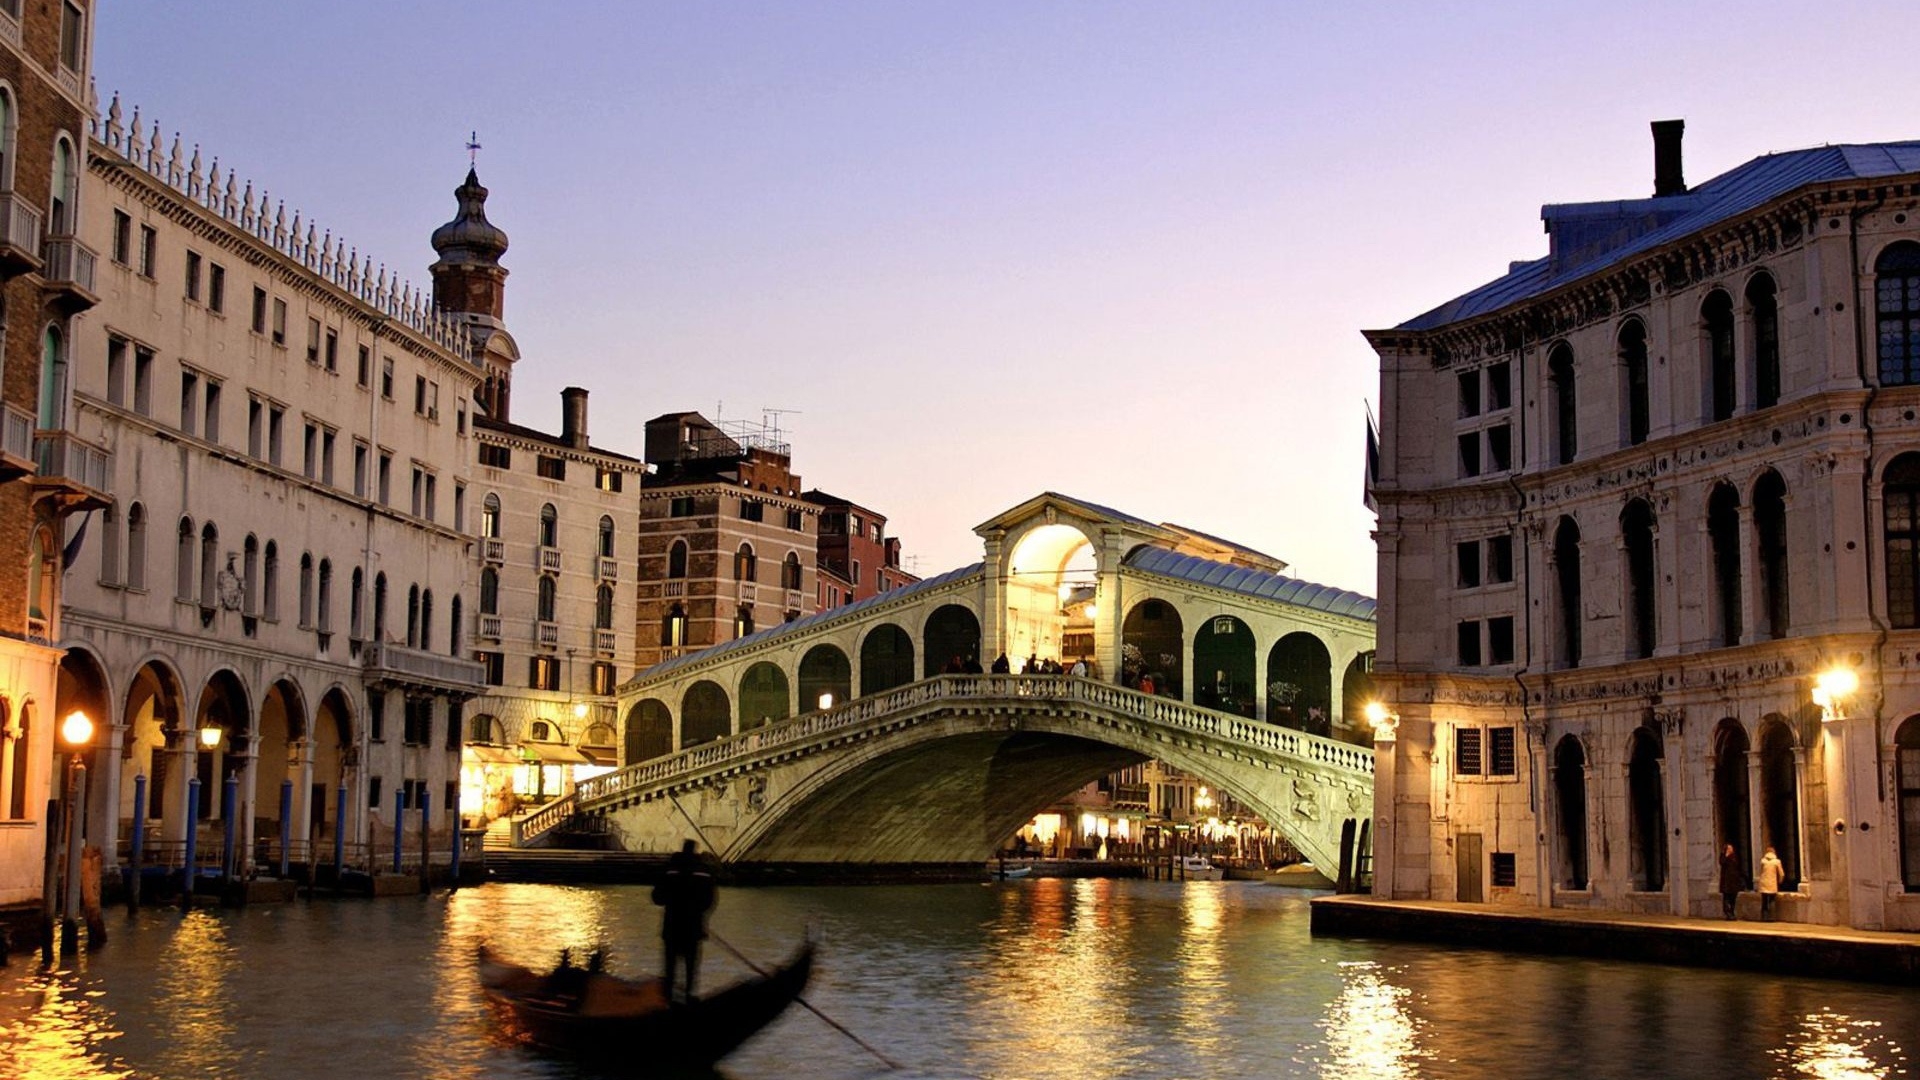 Grand Canal Venice for 1920 x 1080 HDTV 1080p resolution